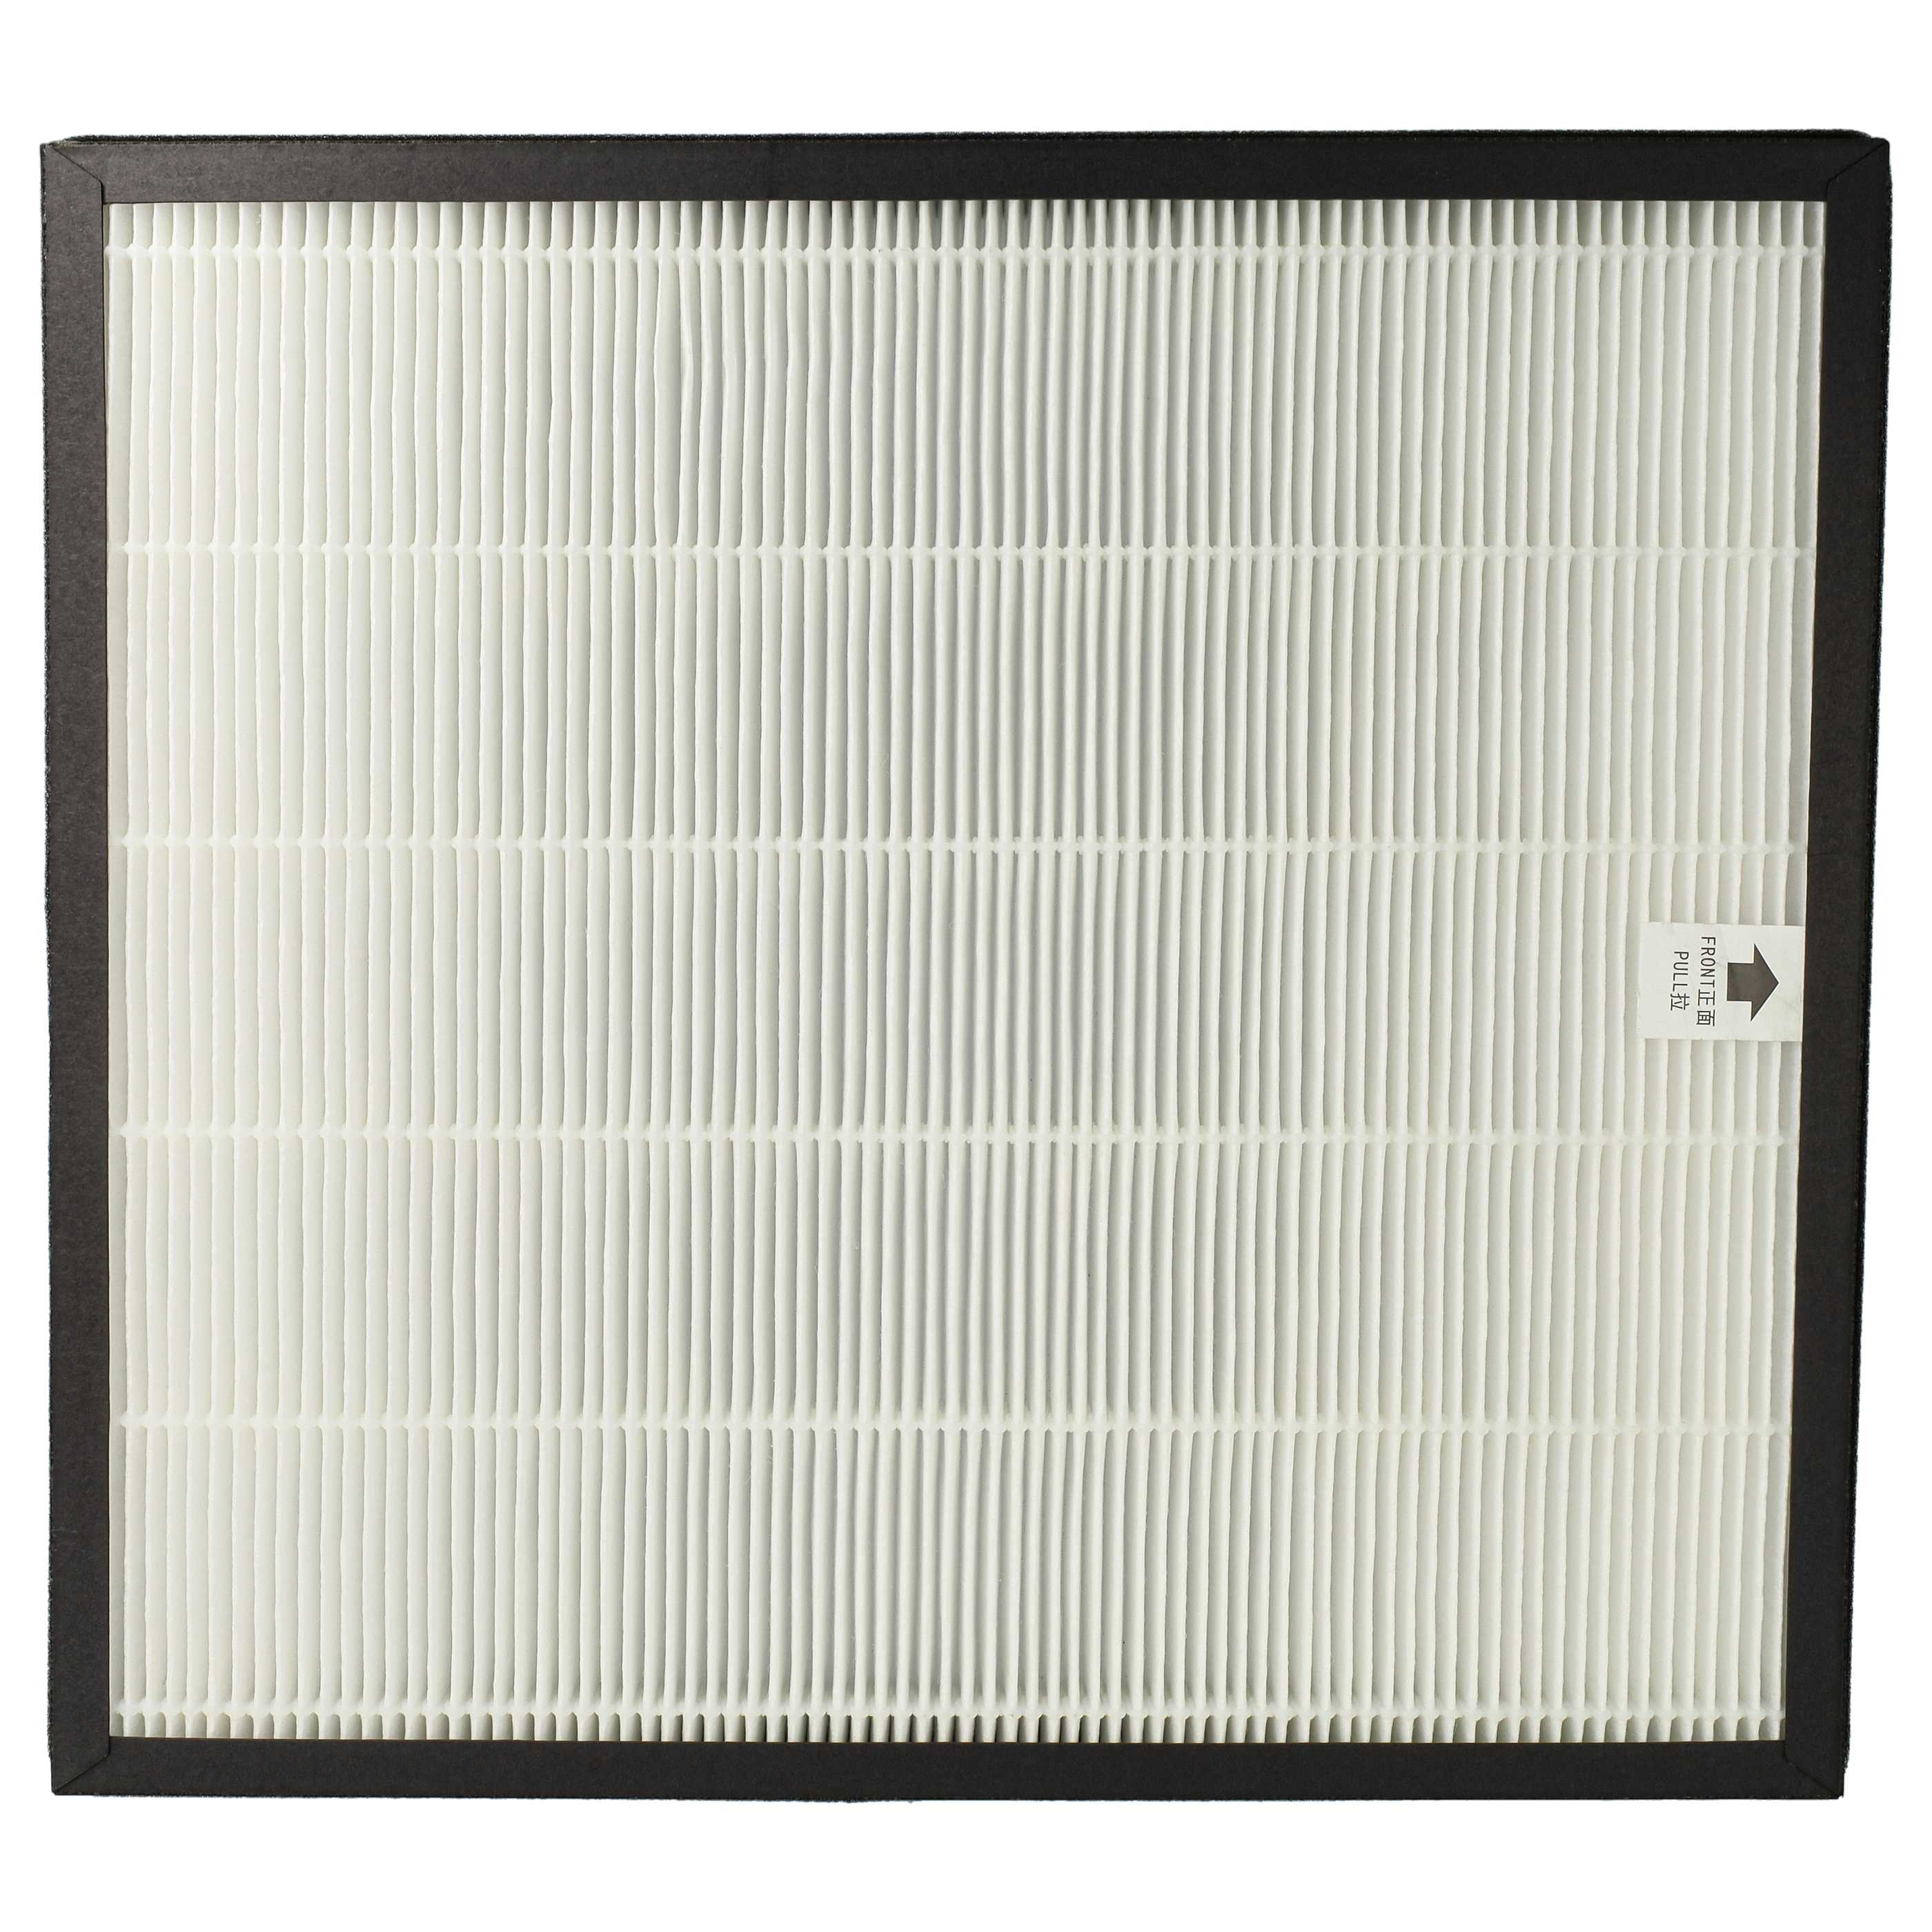 vhbw HEPA Filter Replacement for Philips AC4124/02, AC4124/10 for Air Cleaner - Spare Air Filter